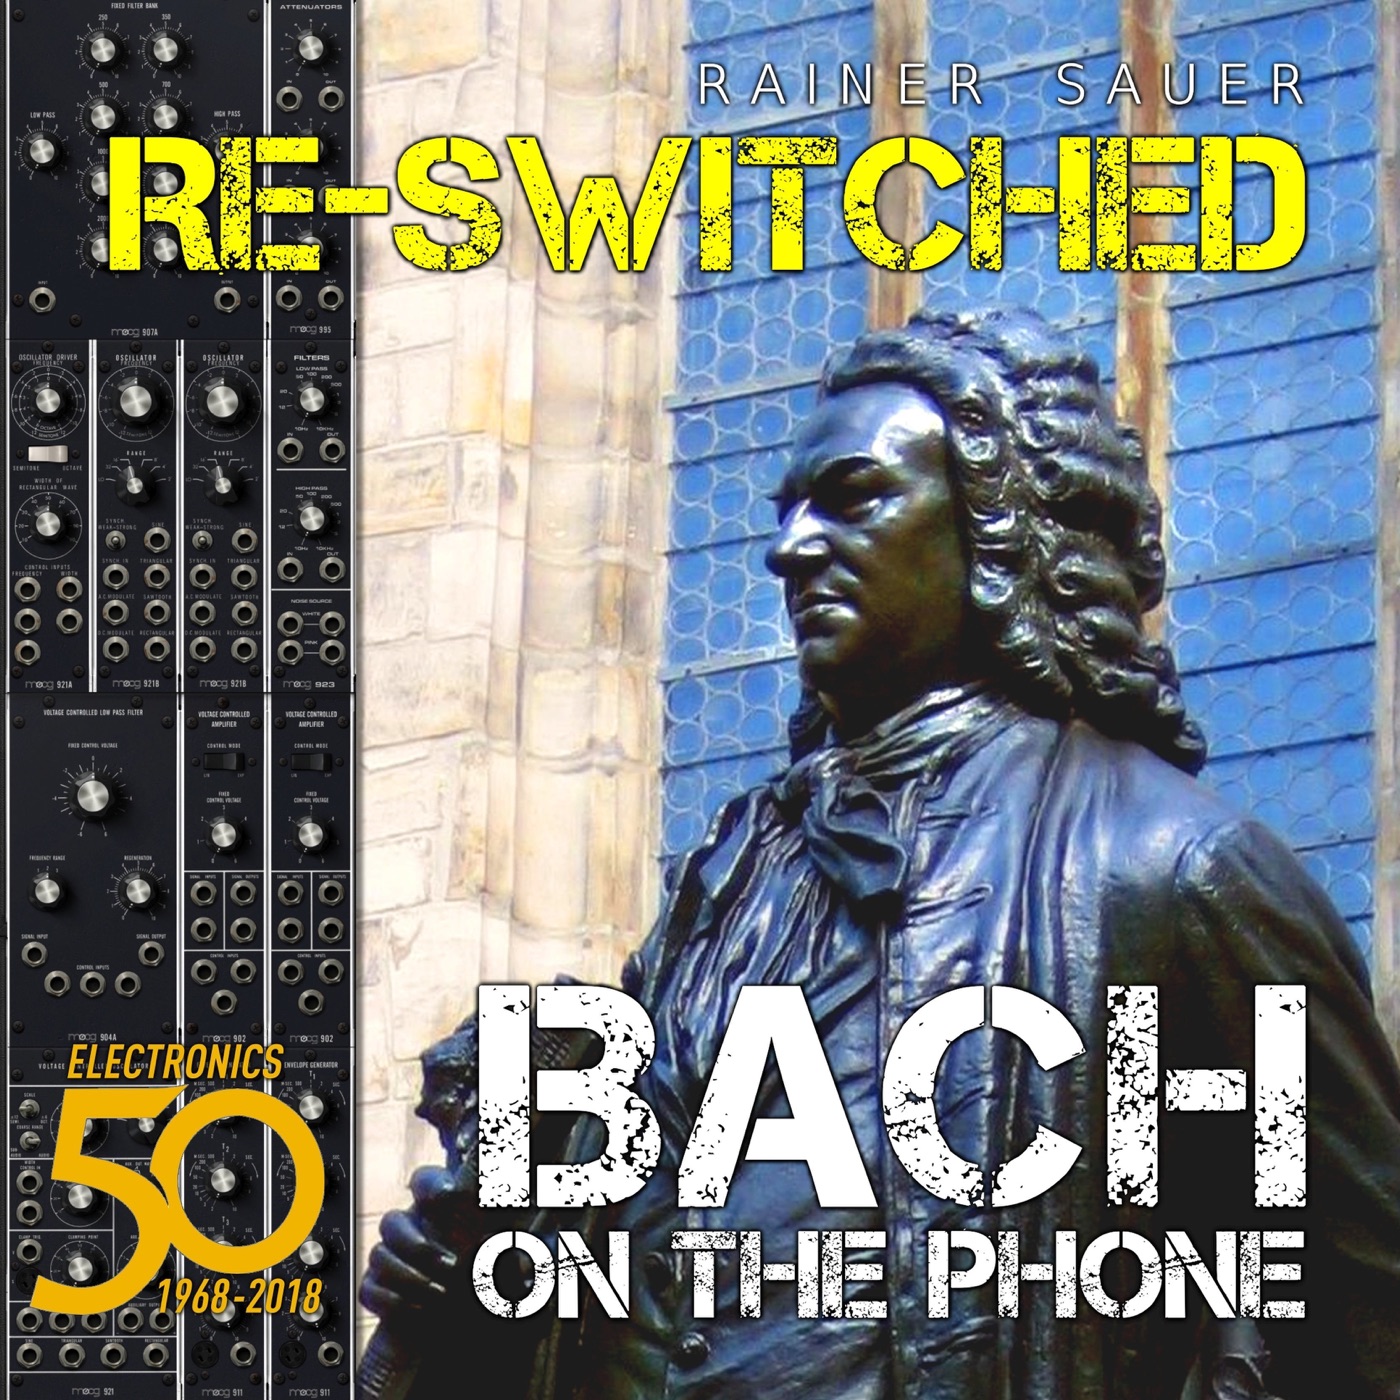 Re-Switched: Bach on the Phone: Celebrating the 50th Anniversary of Electro Music by Rainer Sauer